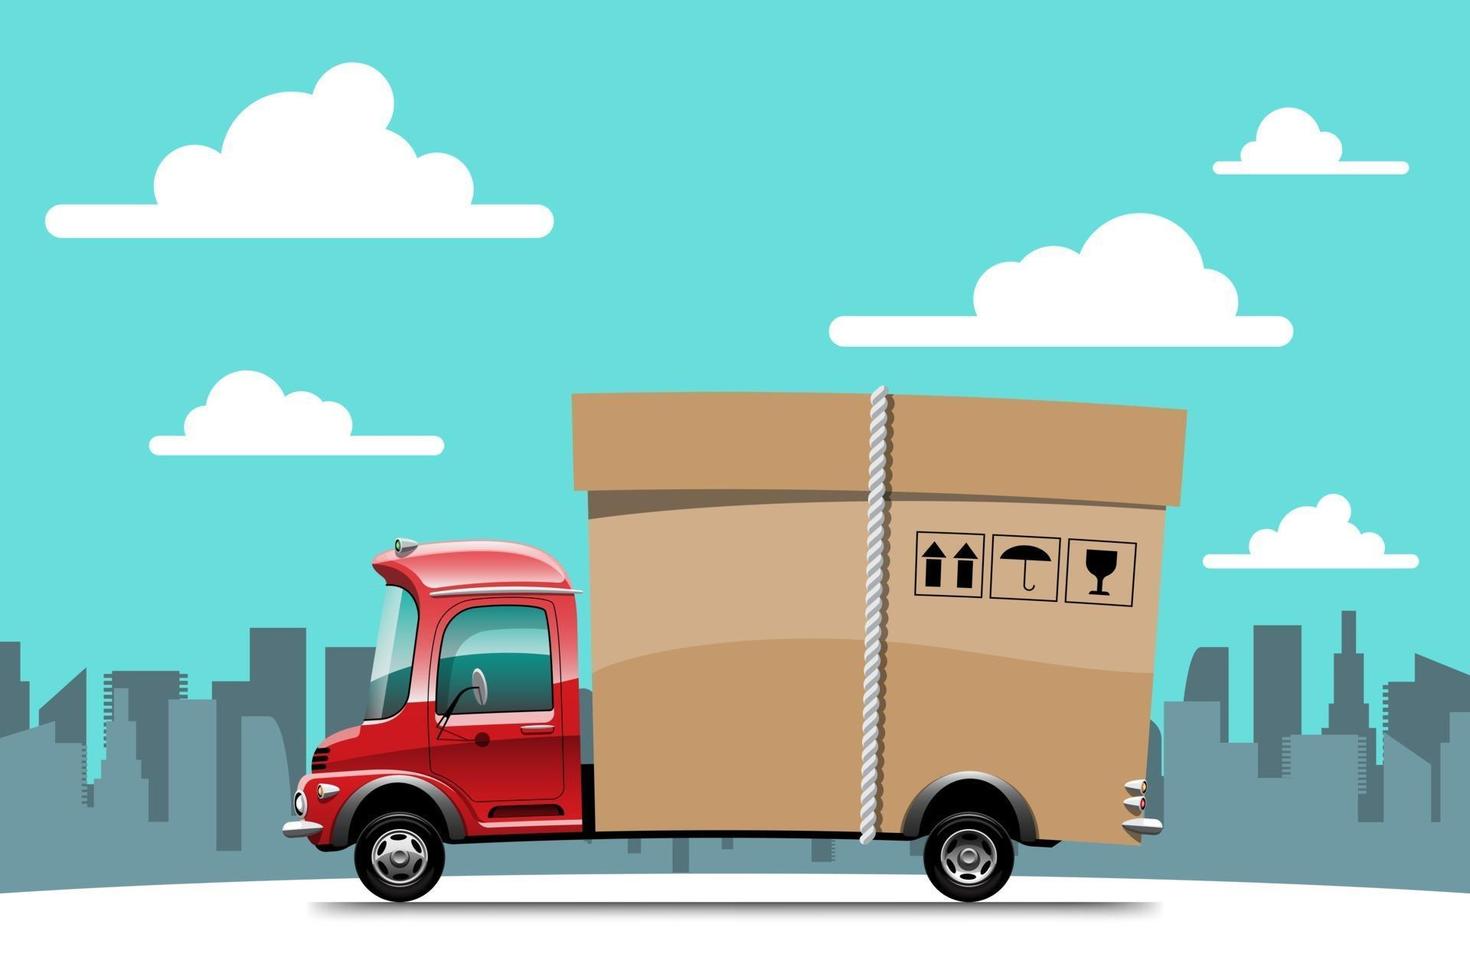 Big isolated delivery vehicle vector icons, flat illustrations of truck, logistic commercial transport concept.